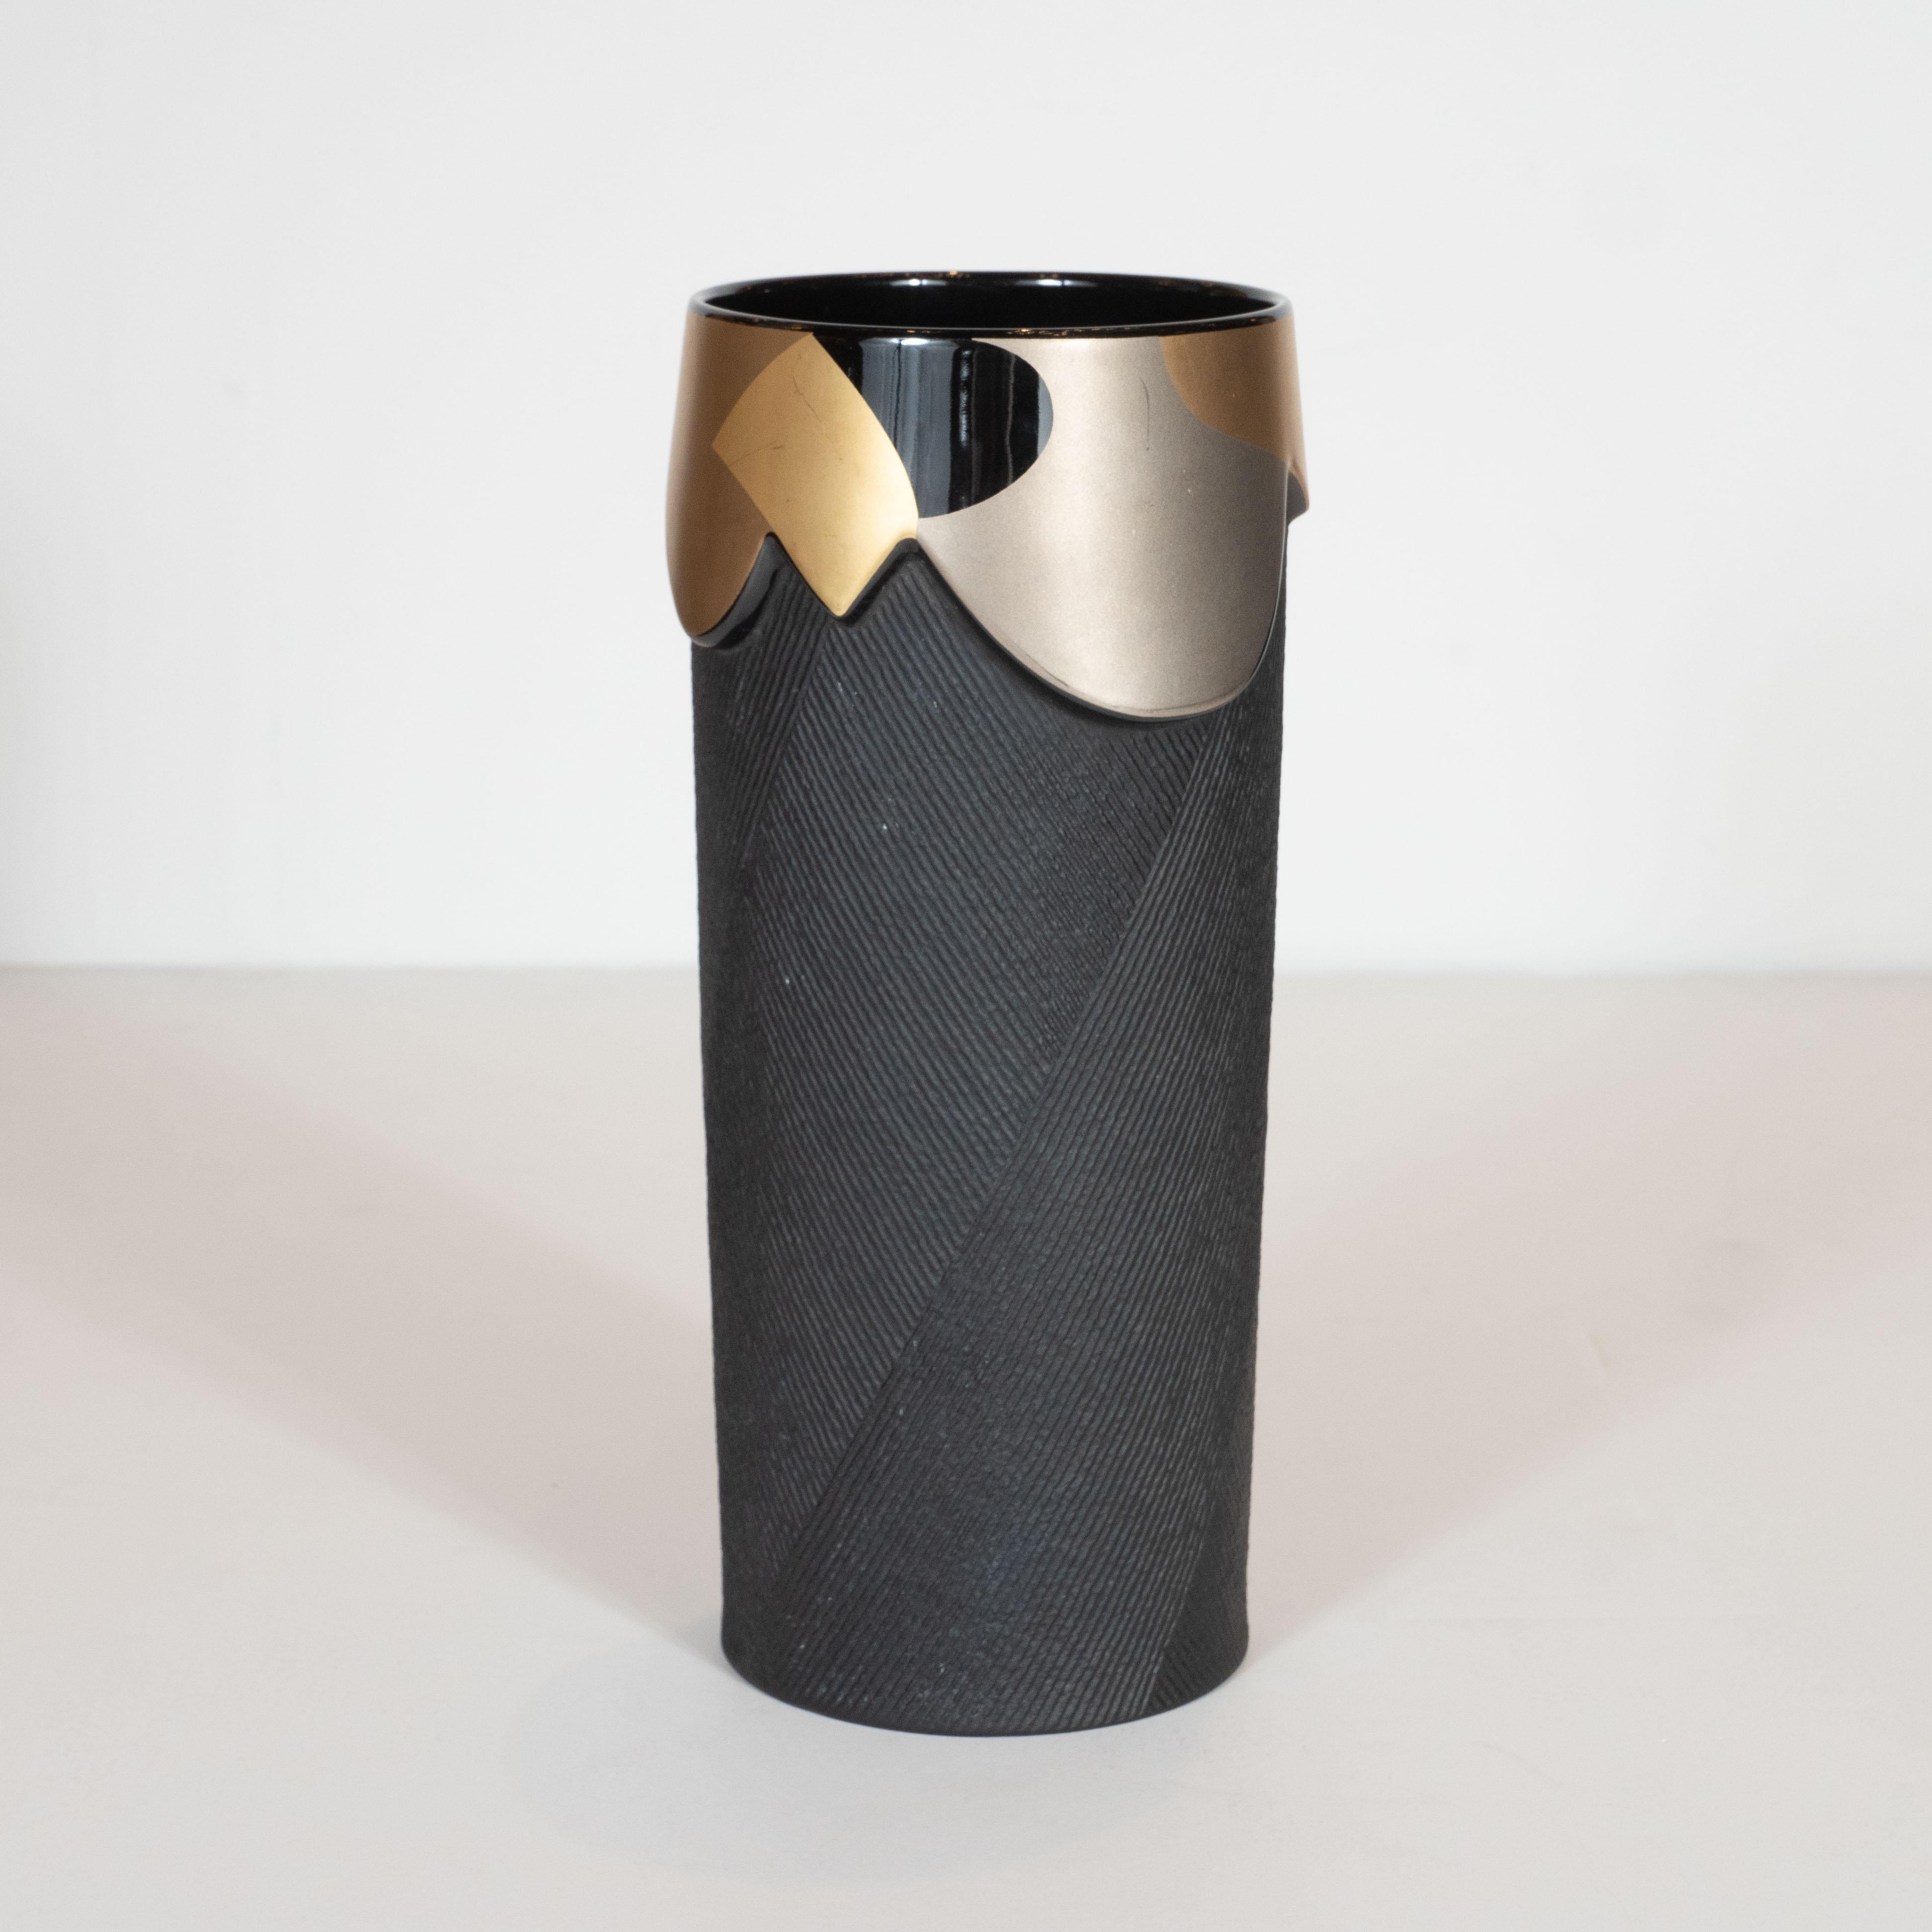 This sophisticated modernist porcelain vase was designed by Johan Van Loon handcrafted by the esteemed maker Rosenthal in Germany circa 1980. It features a cylindrical body with raised striated projections traveling in different directions that